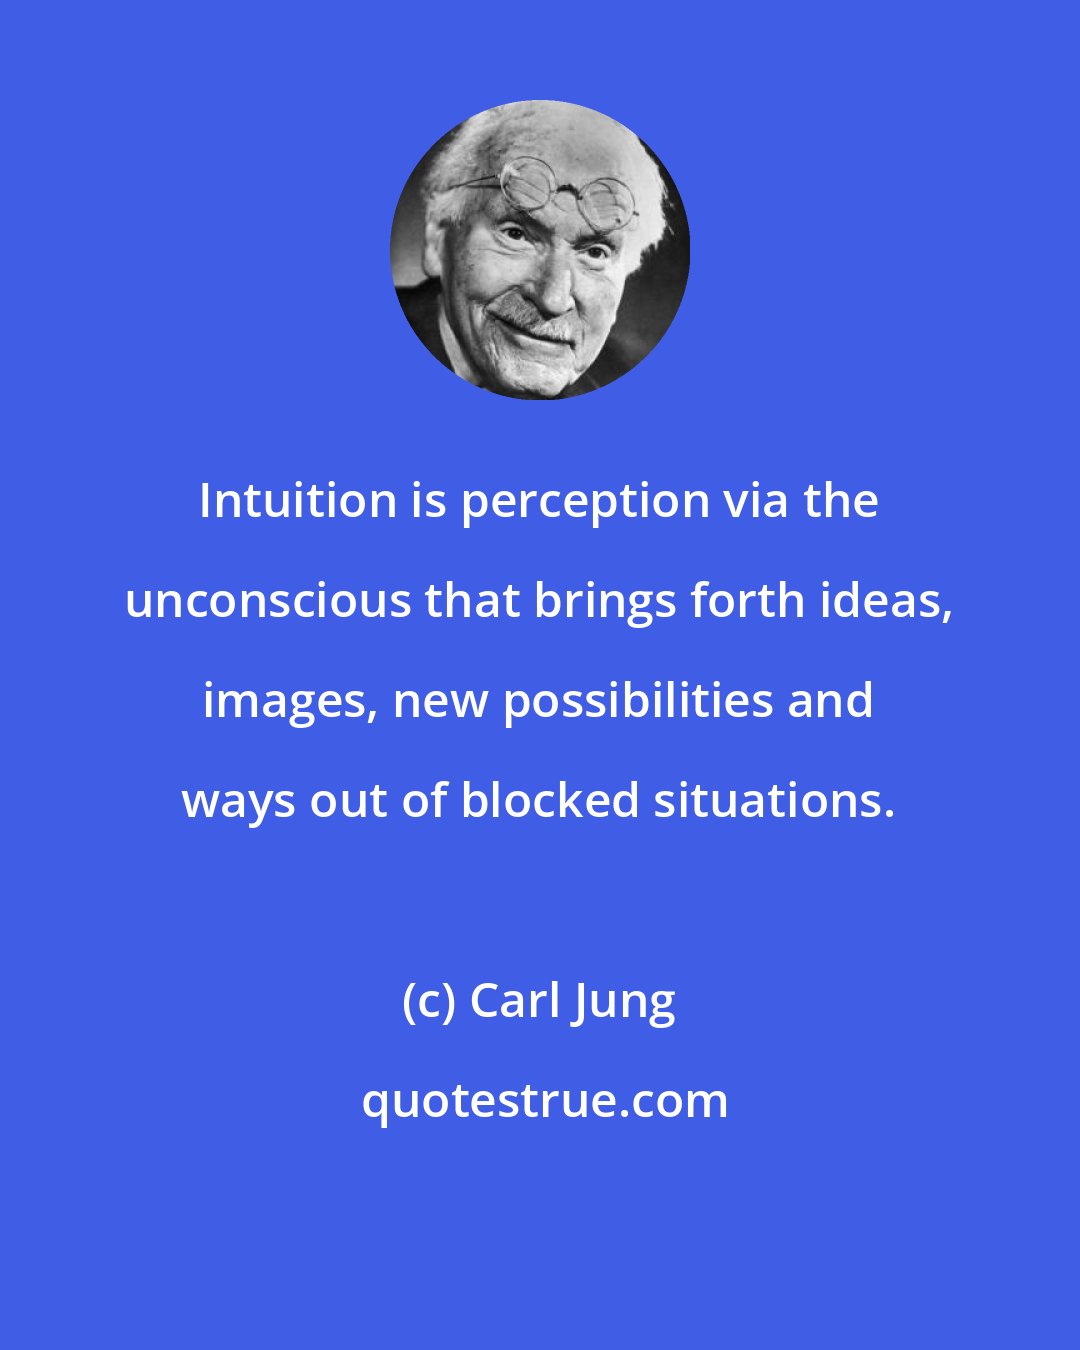 Carl Jung: Intuition is perception via the unconscious that brings forth ideas, images, new possibilities and ways out of blocked situations.